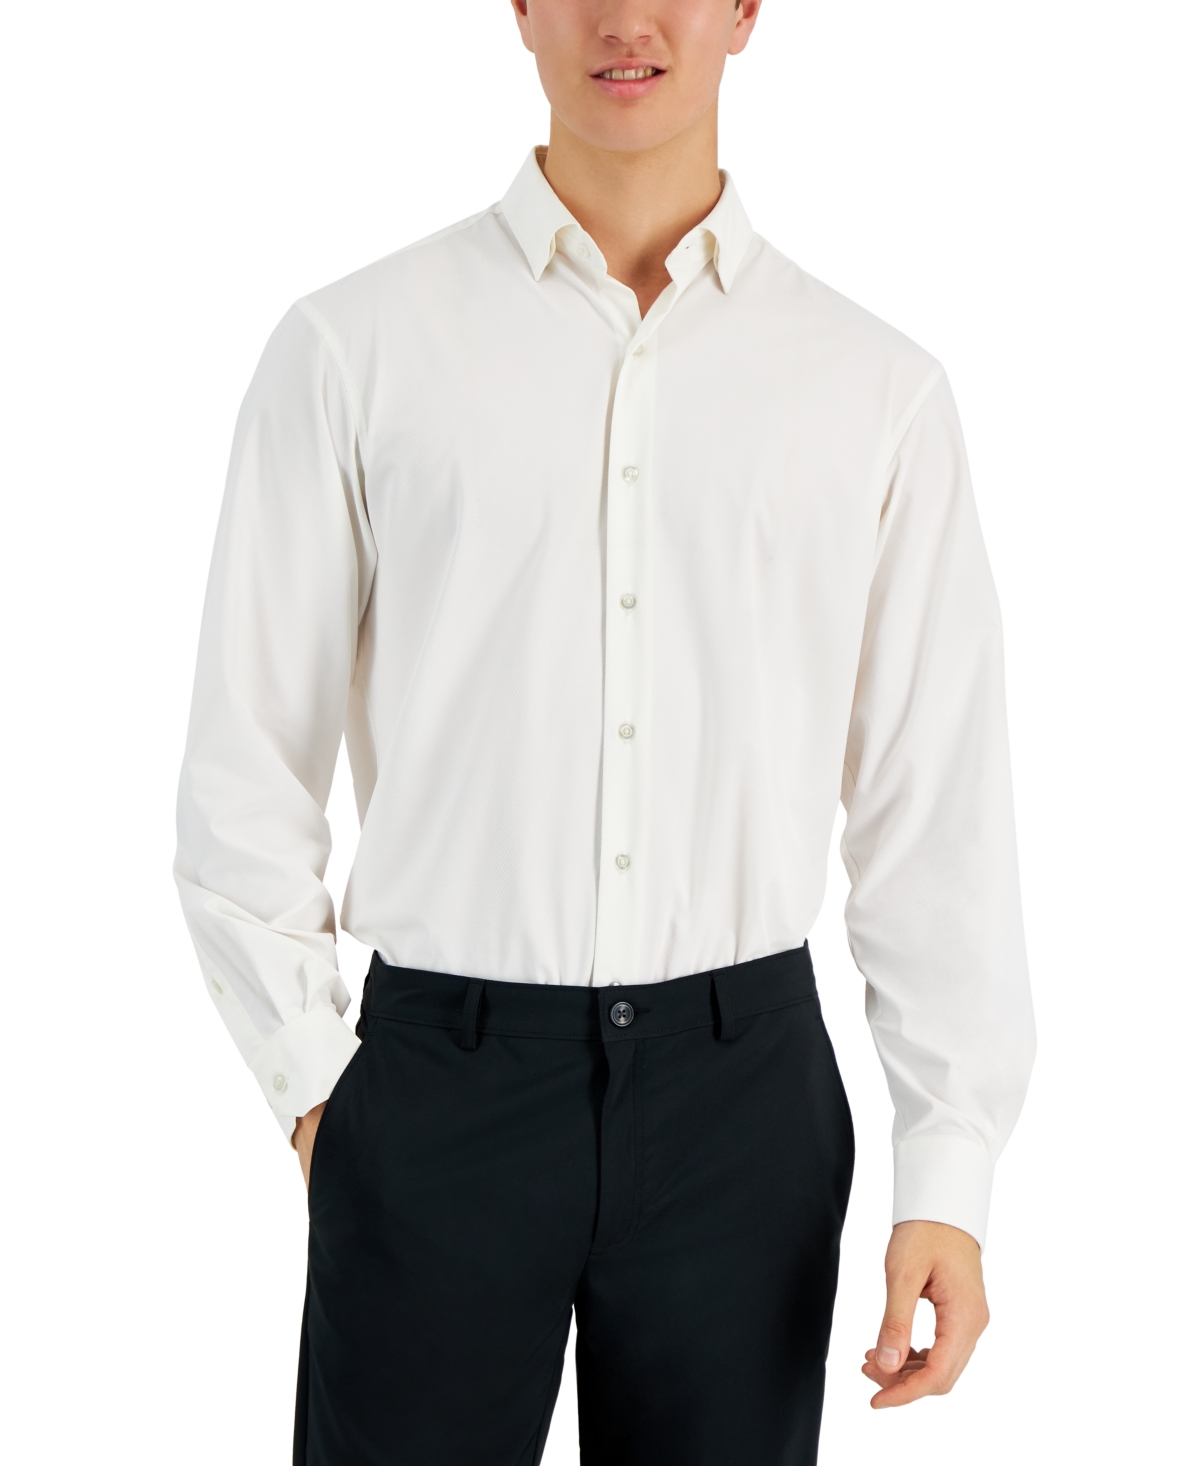 Men's Regular Fit Travel Ready Solid Dress Shirt, Created for Macy's - Bright White